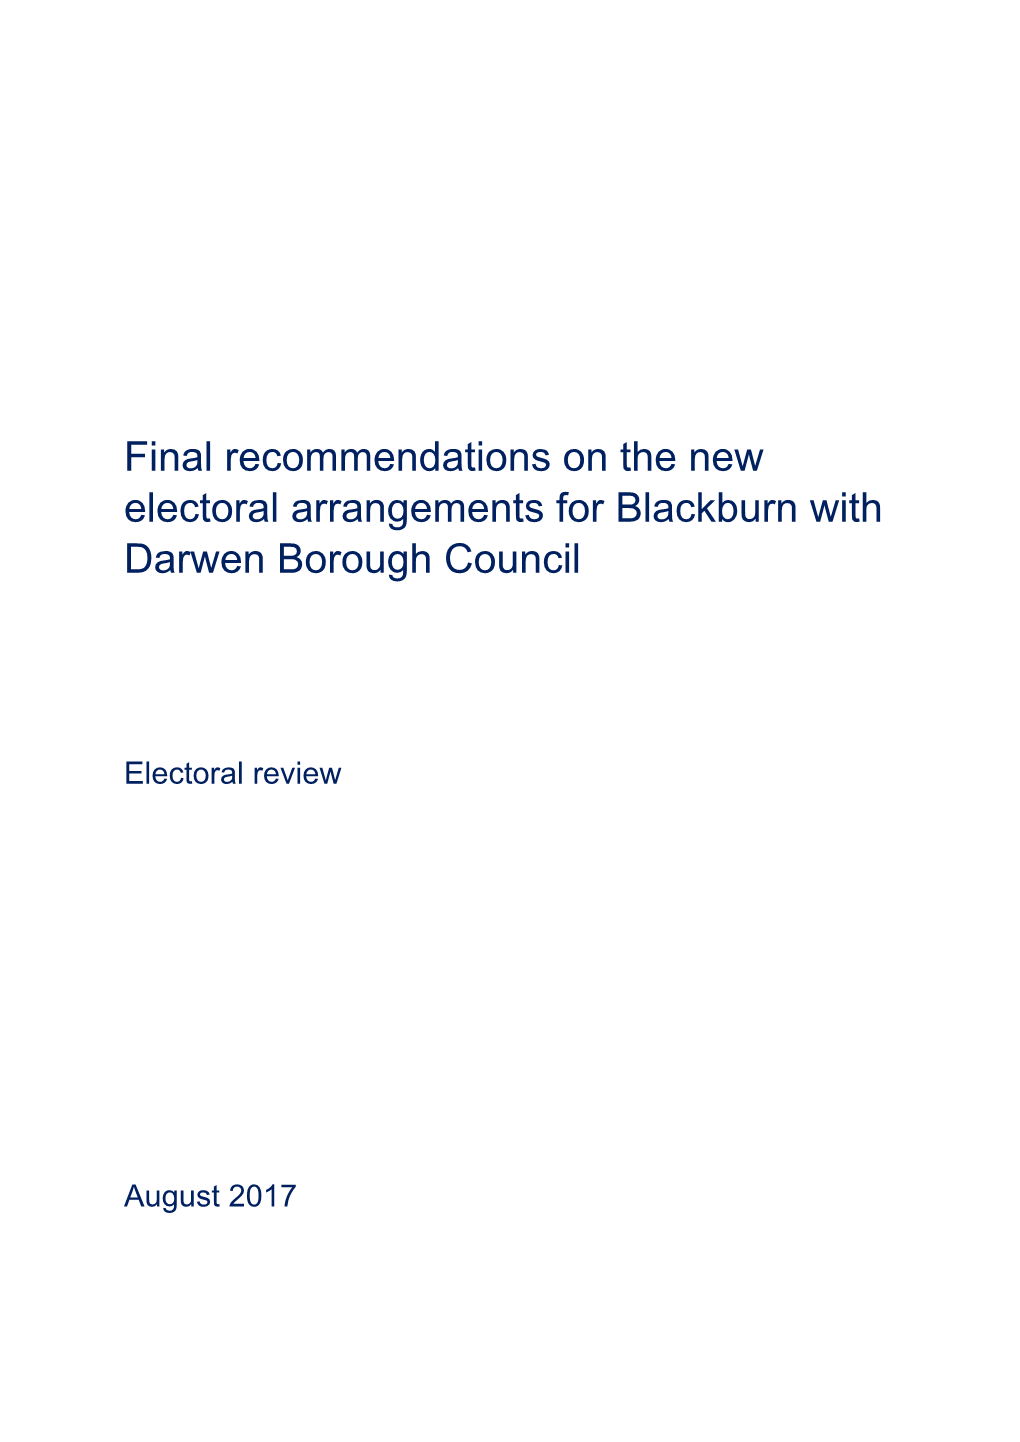 Final Recommendations on the New Electoral Arrangements for Blackburn with Darwen Borough Council